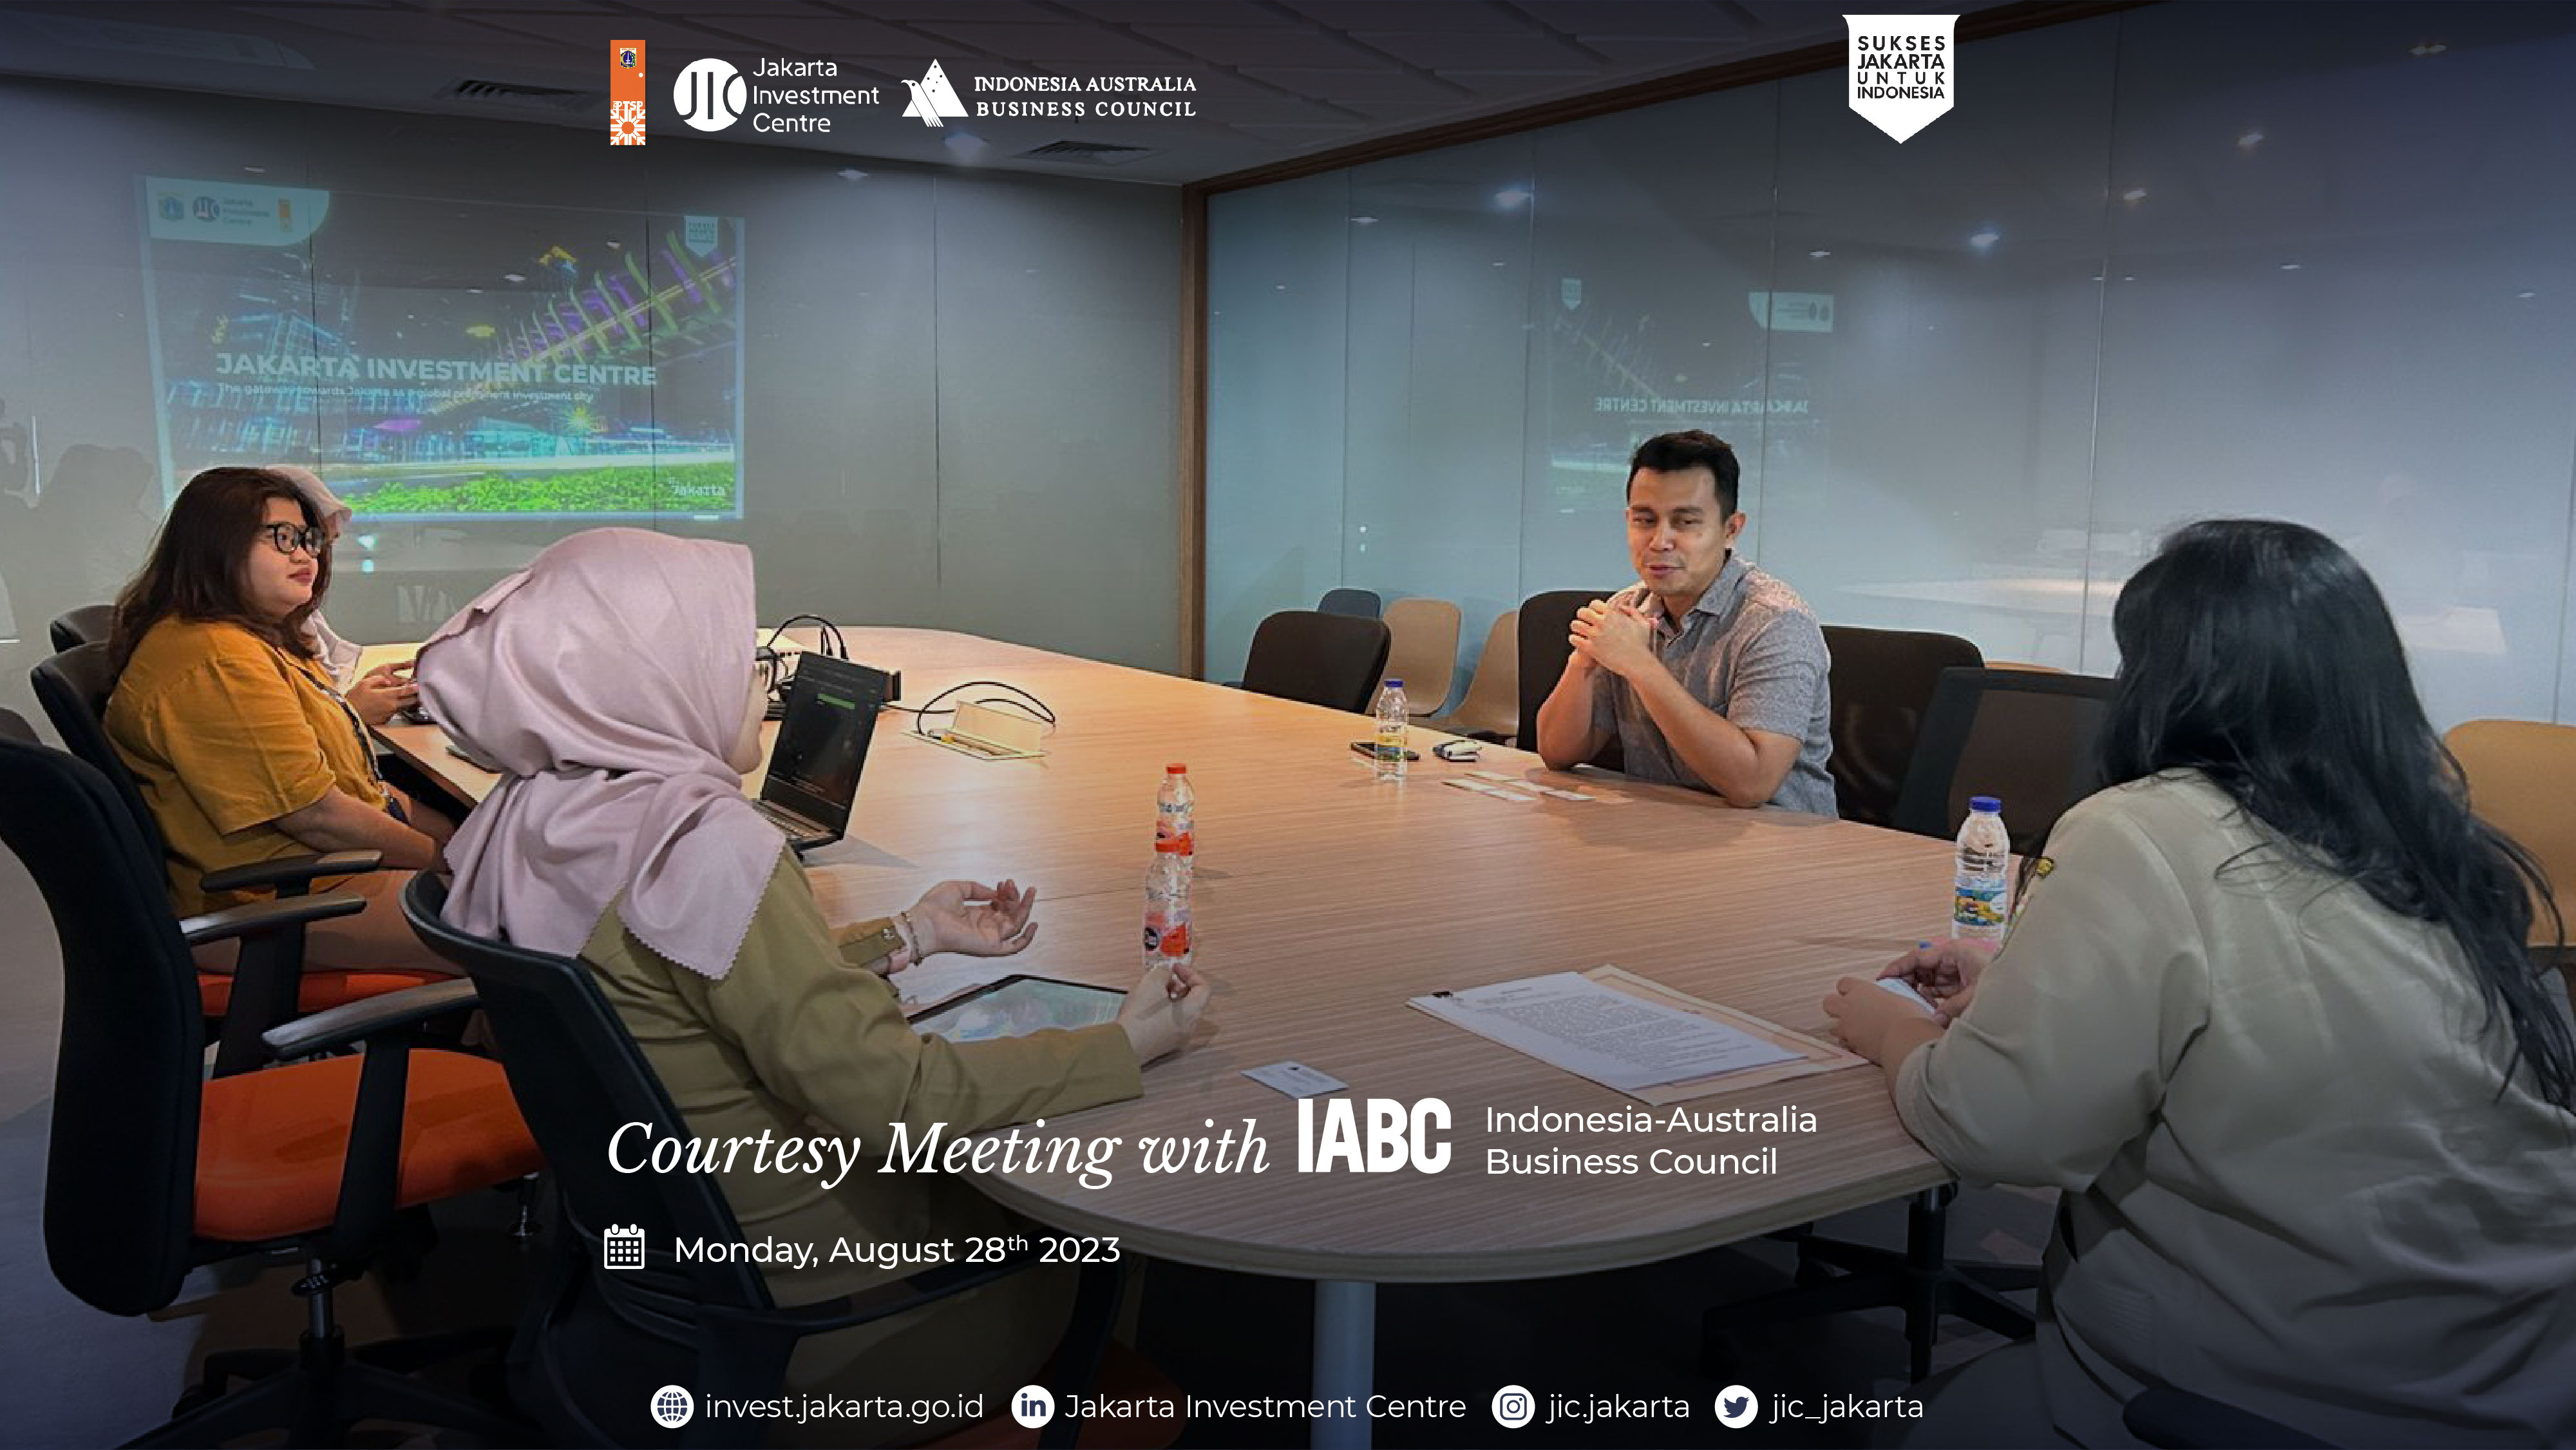 Courtesy Meeting with Indonesia Australia Business Council (IABC)